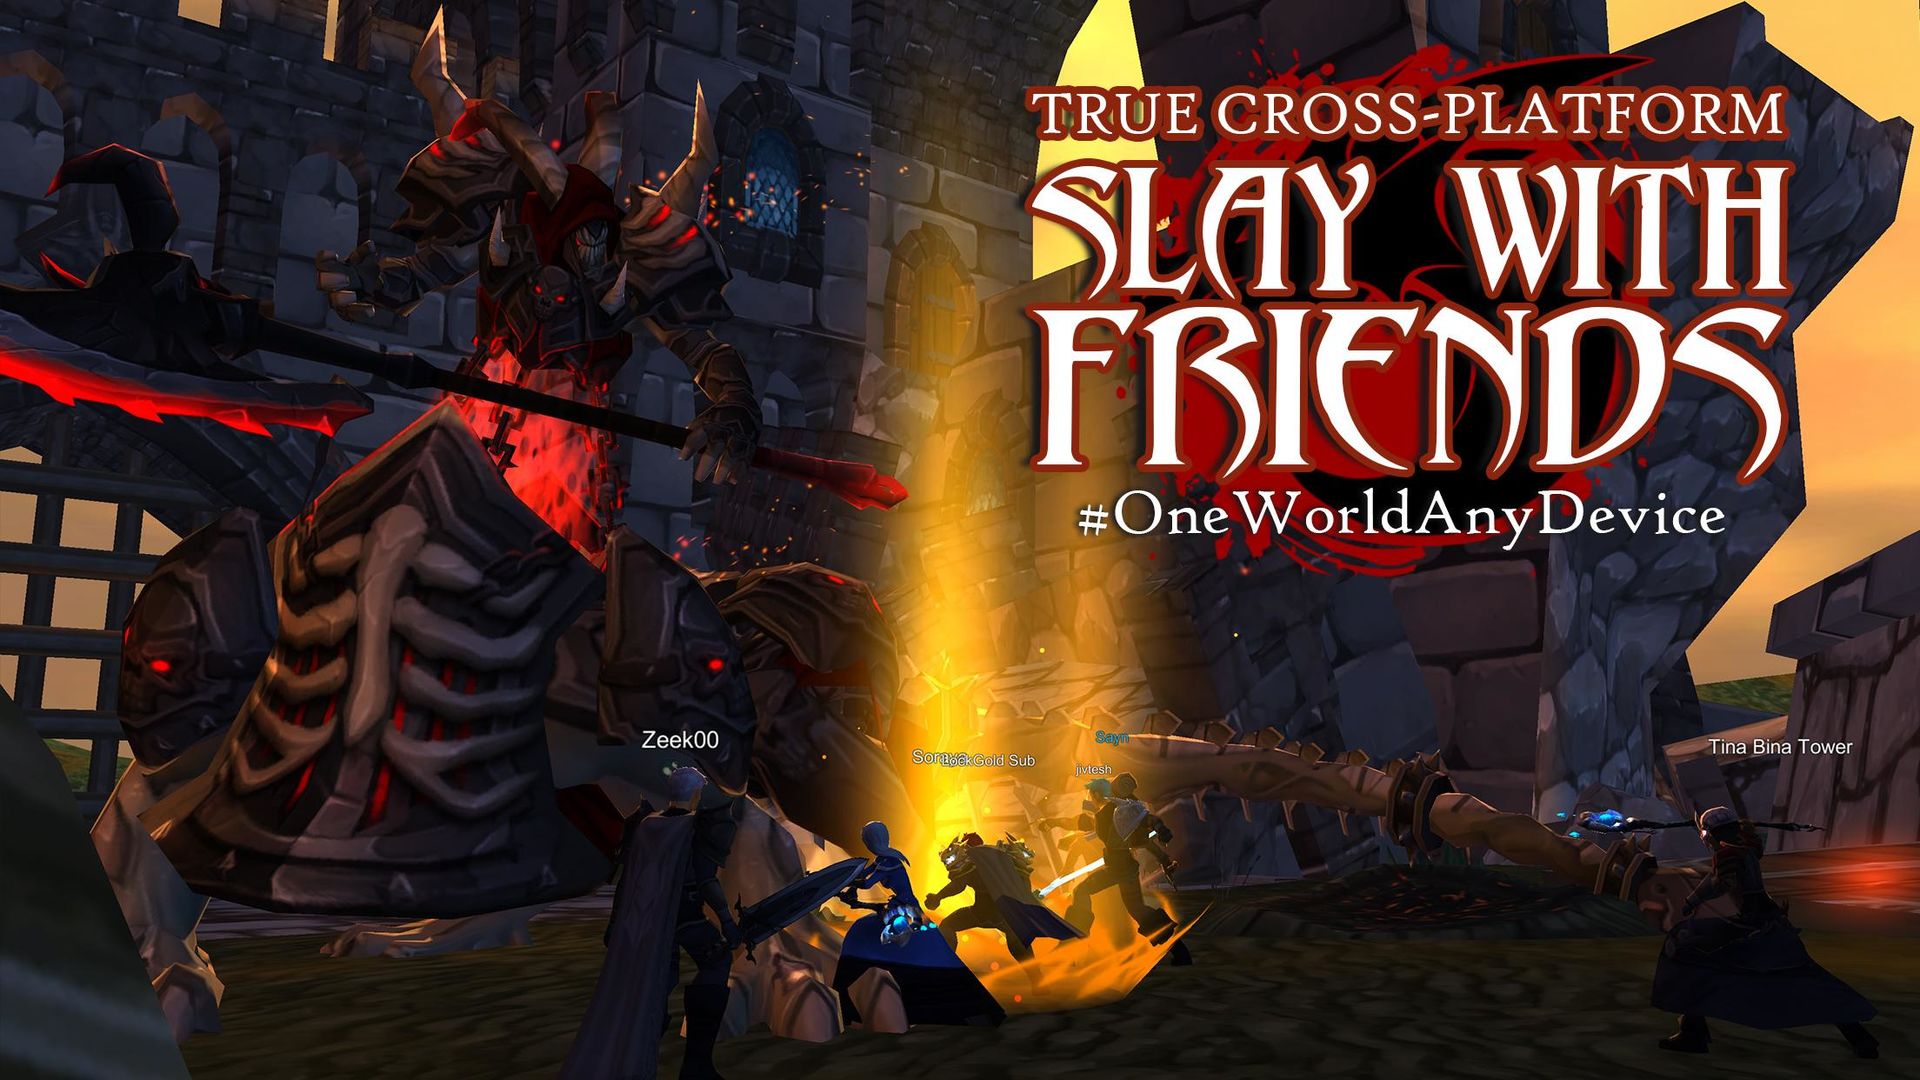 World game chat mmo 3d virtual History of